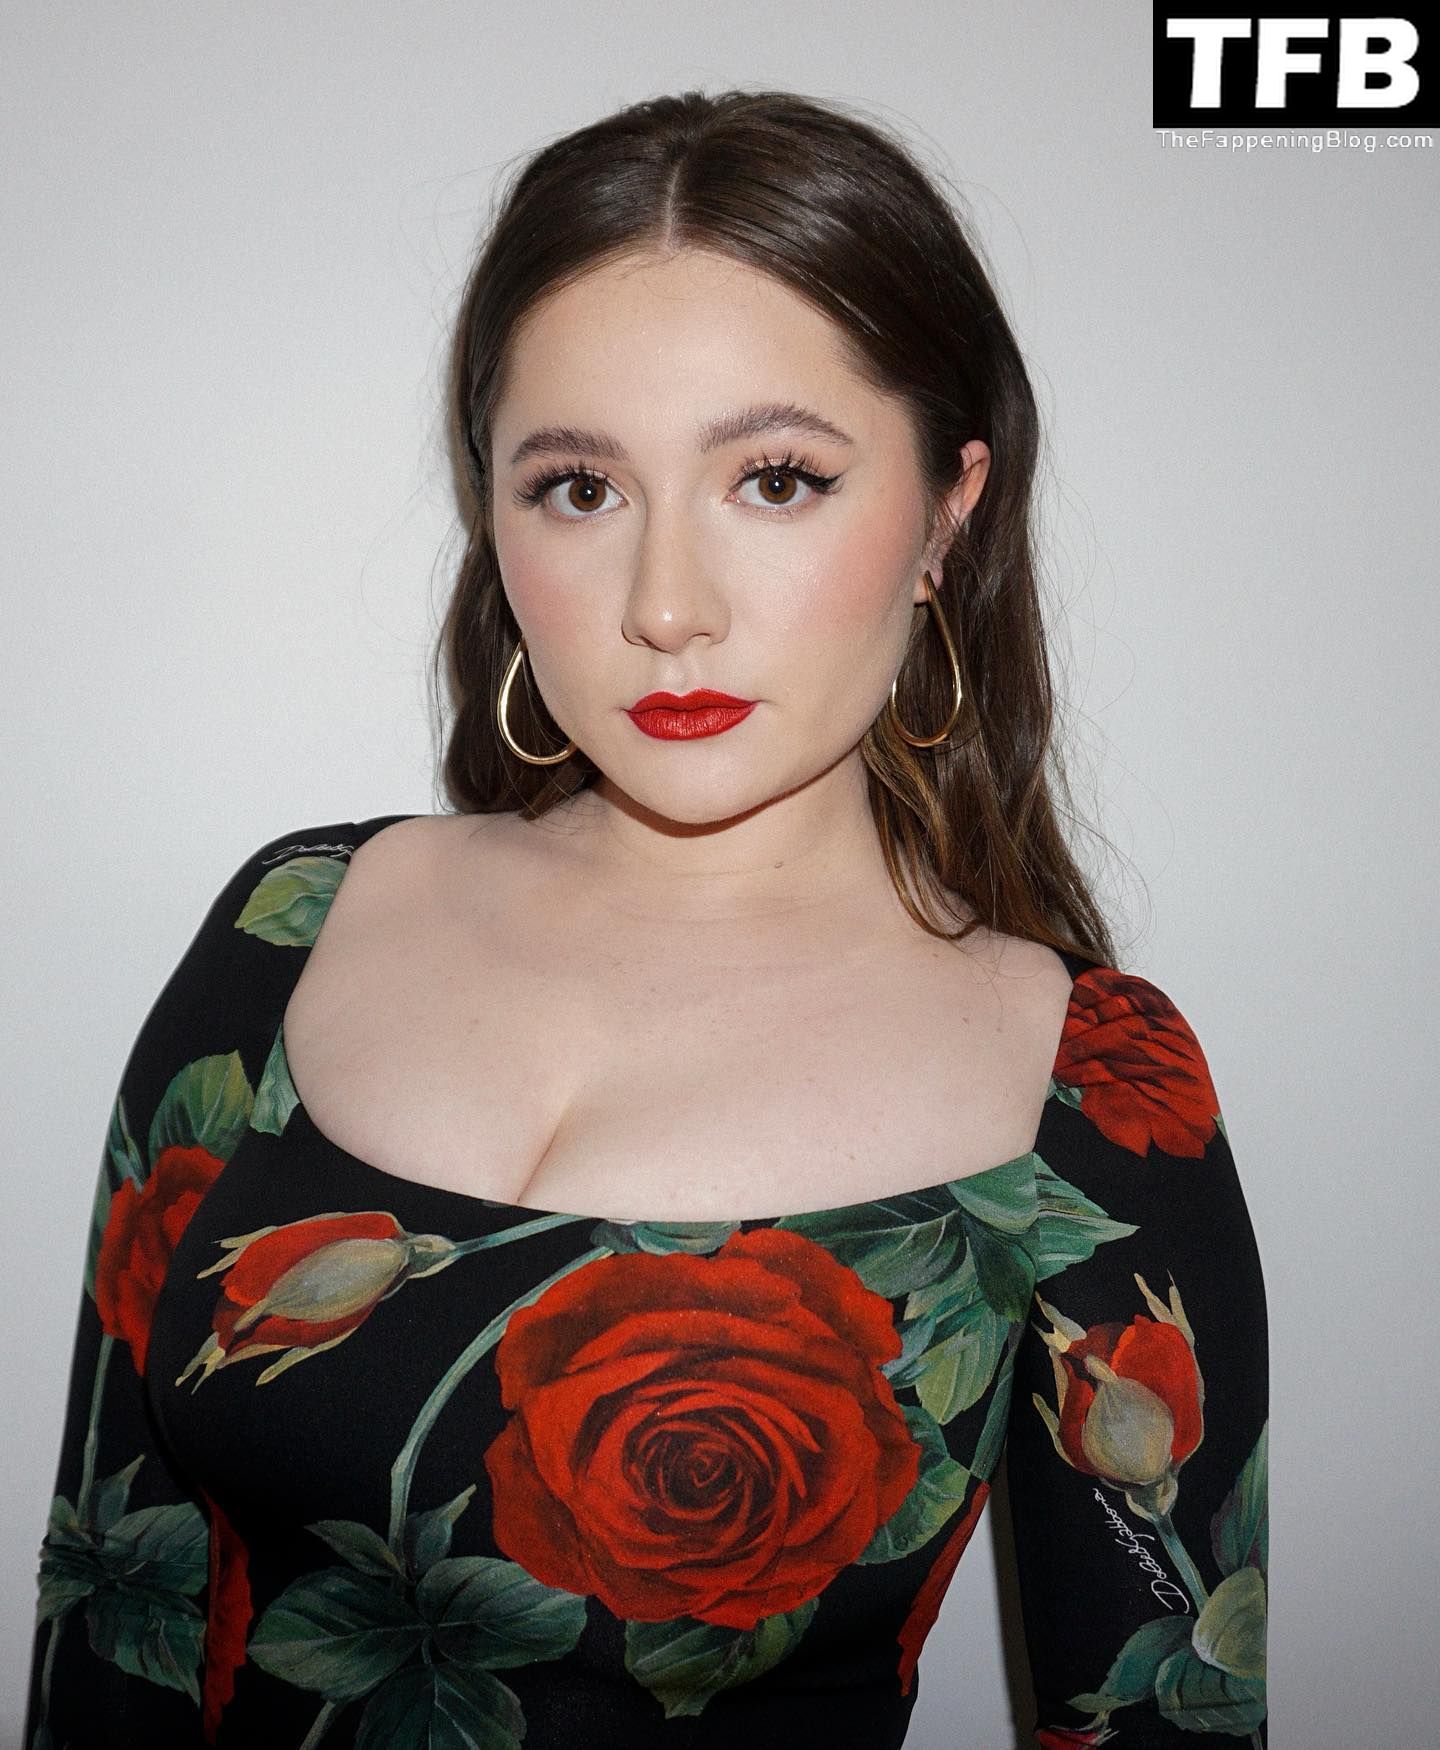 Emma-Kenney-Sexy-The-Fappening-Blog-4.jpg